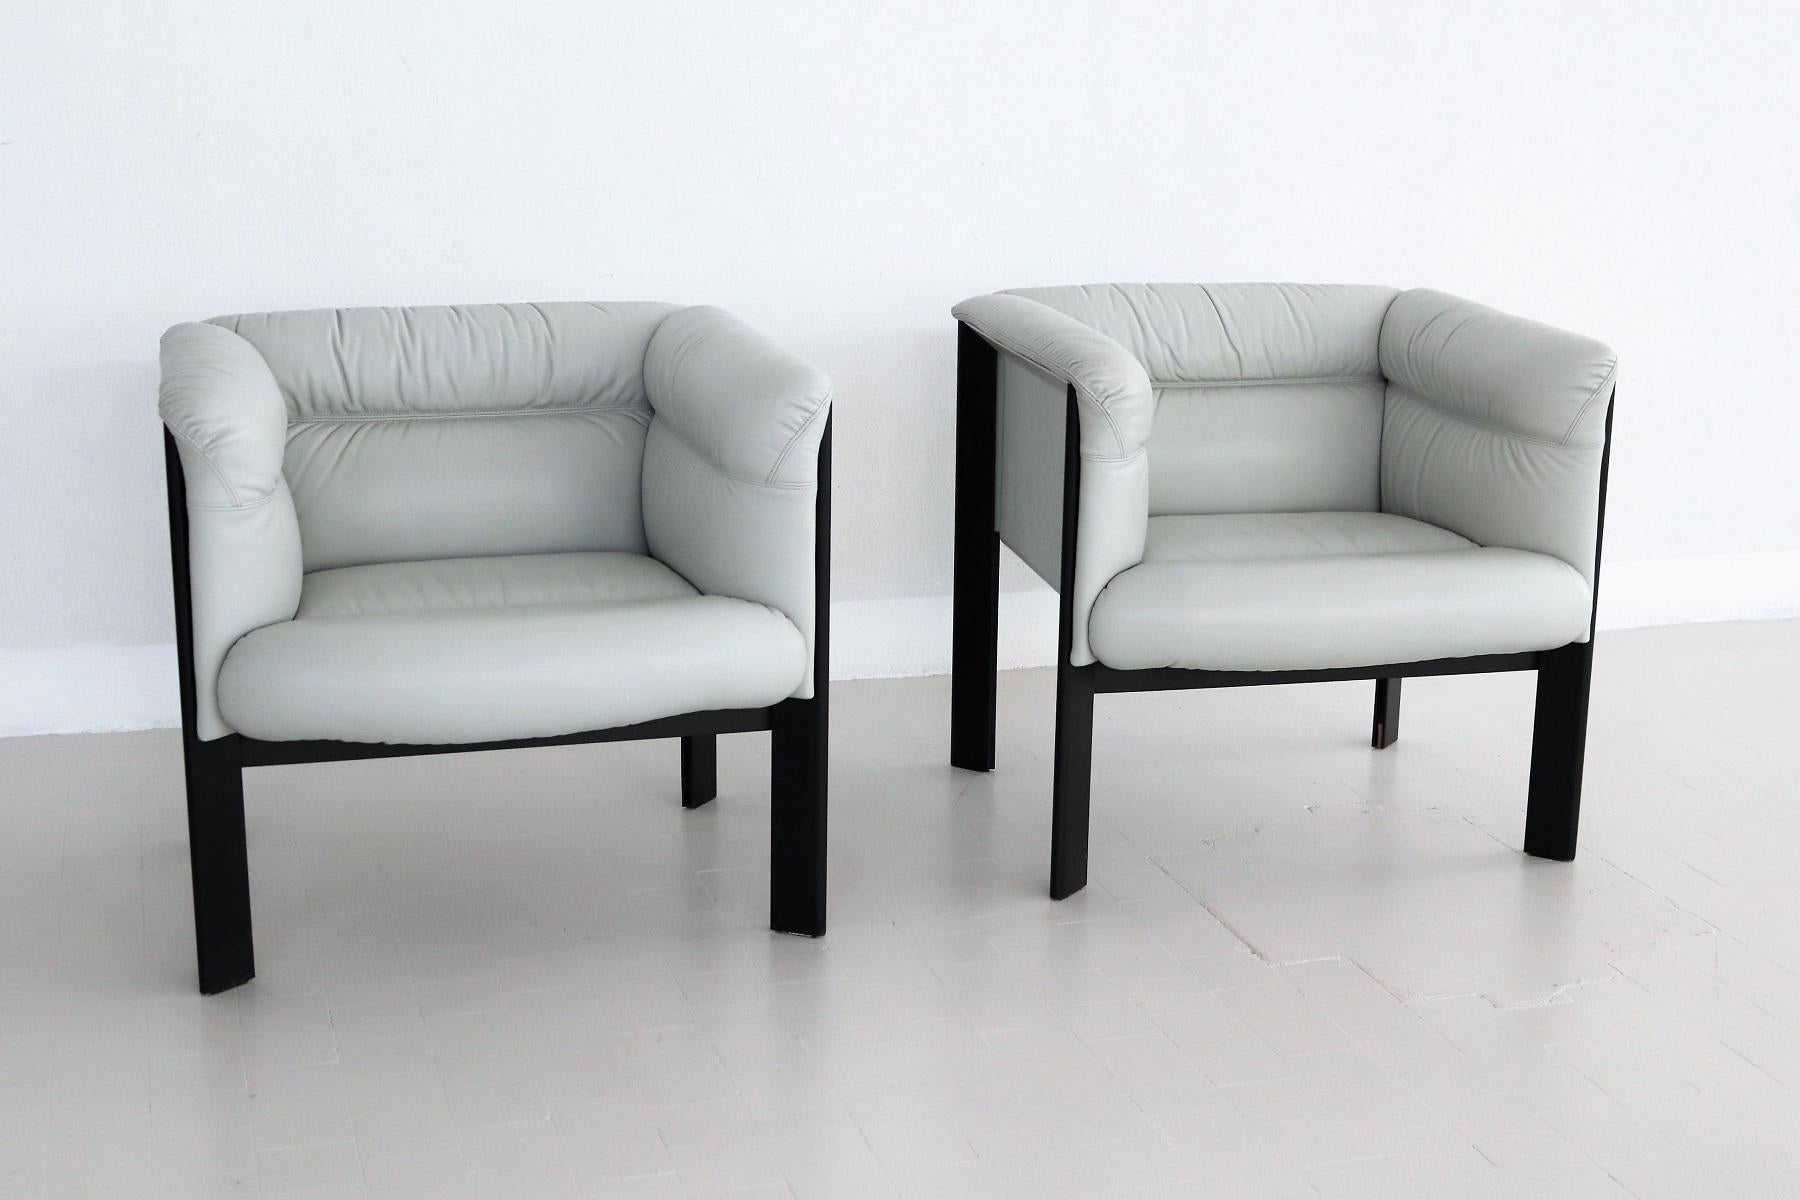 Mid-Century Modern Italian Lounge Chairs in Leather by Marco Zanuso for Poltrona Frau, 1980s